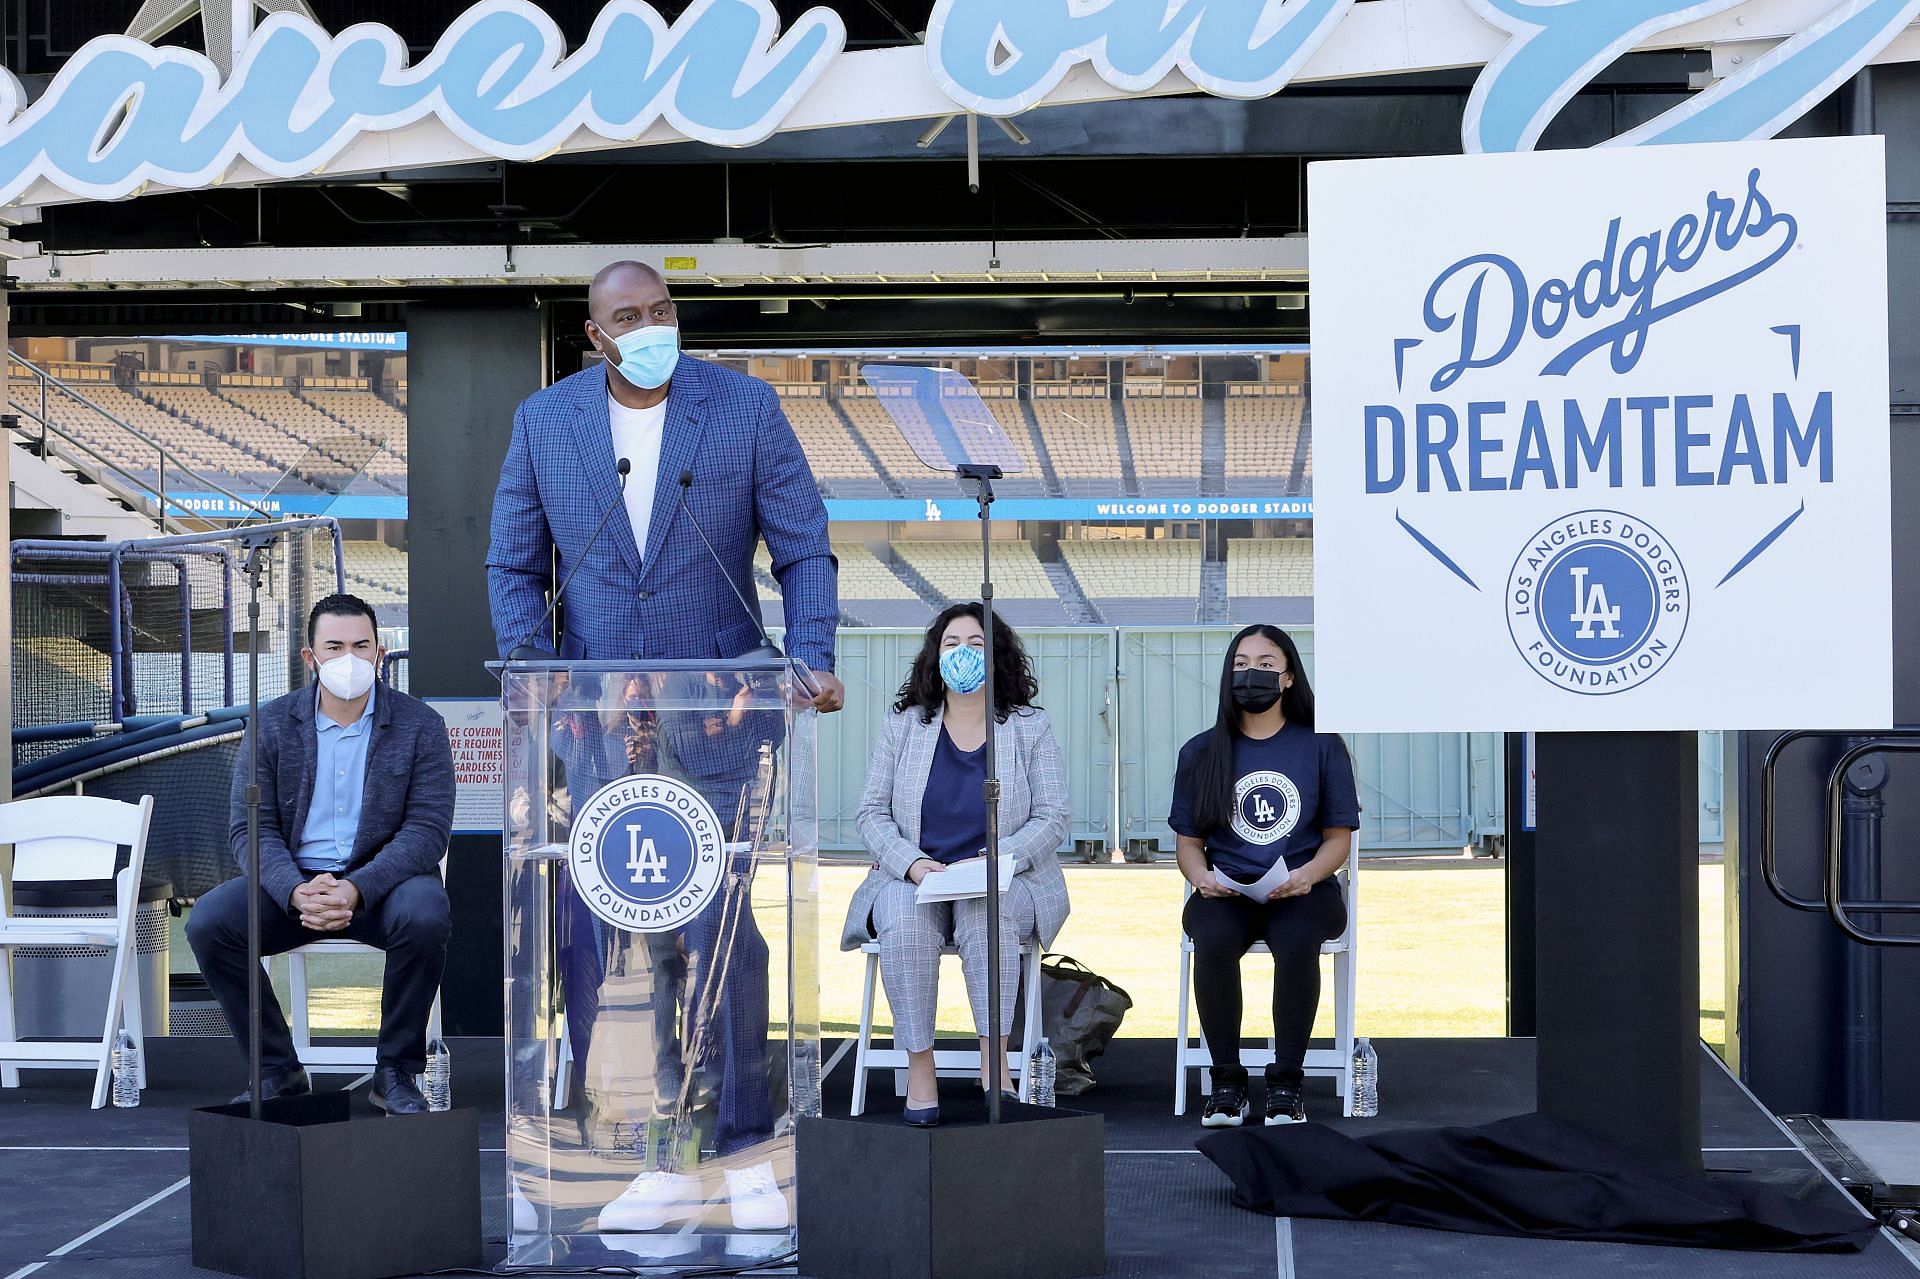 Los Angeles Dodgers Foundation press conference with Magic Johnson (at podium)